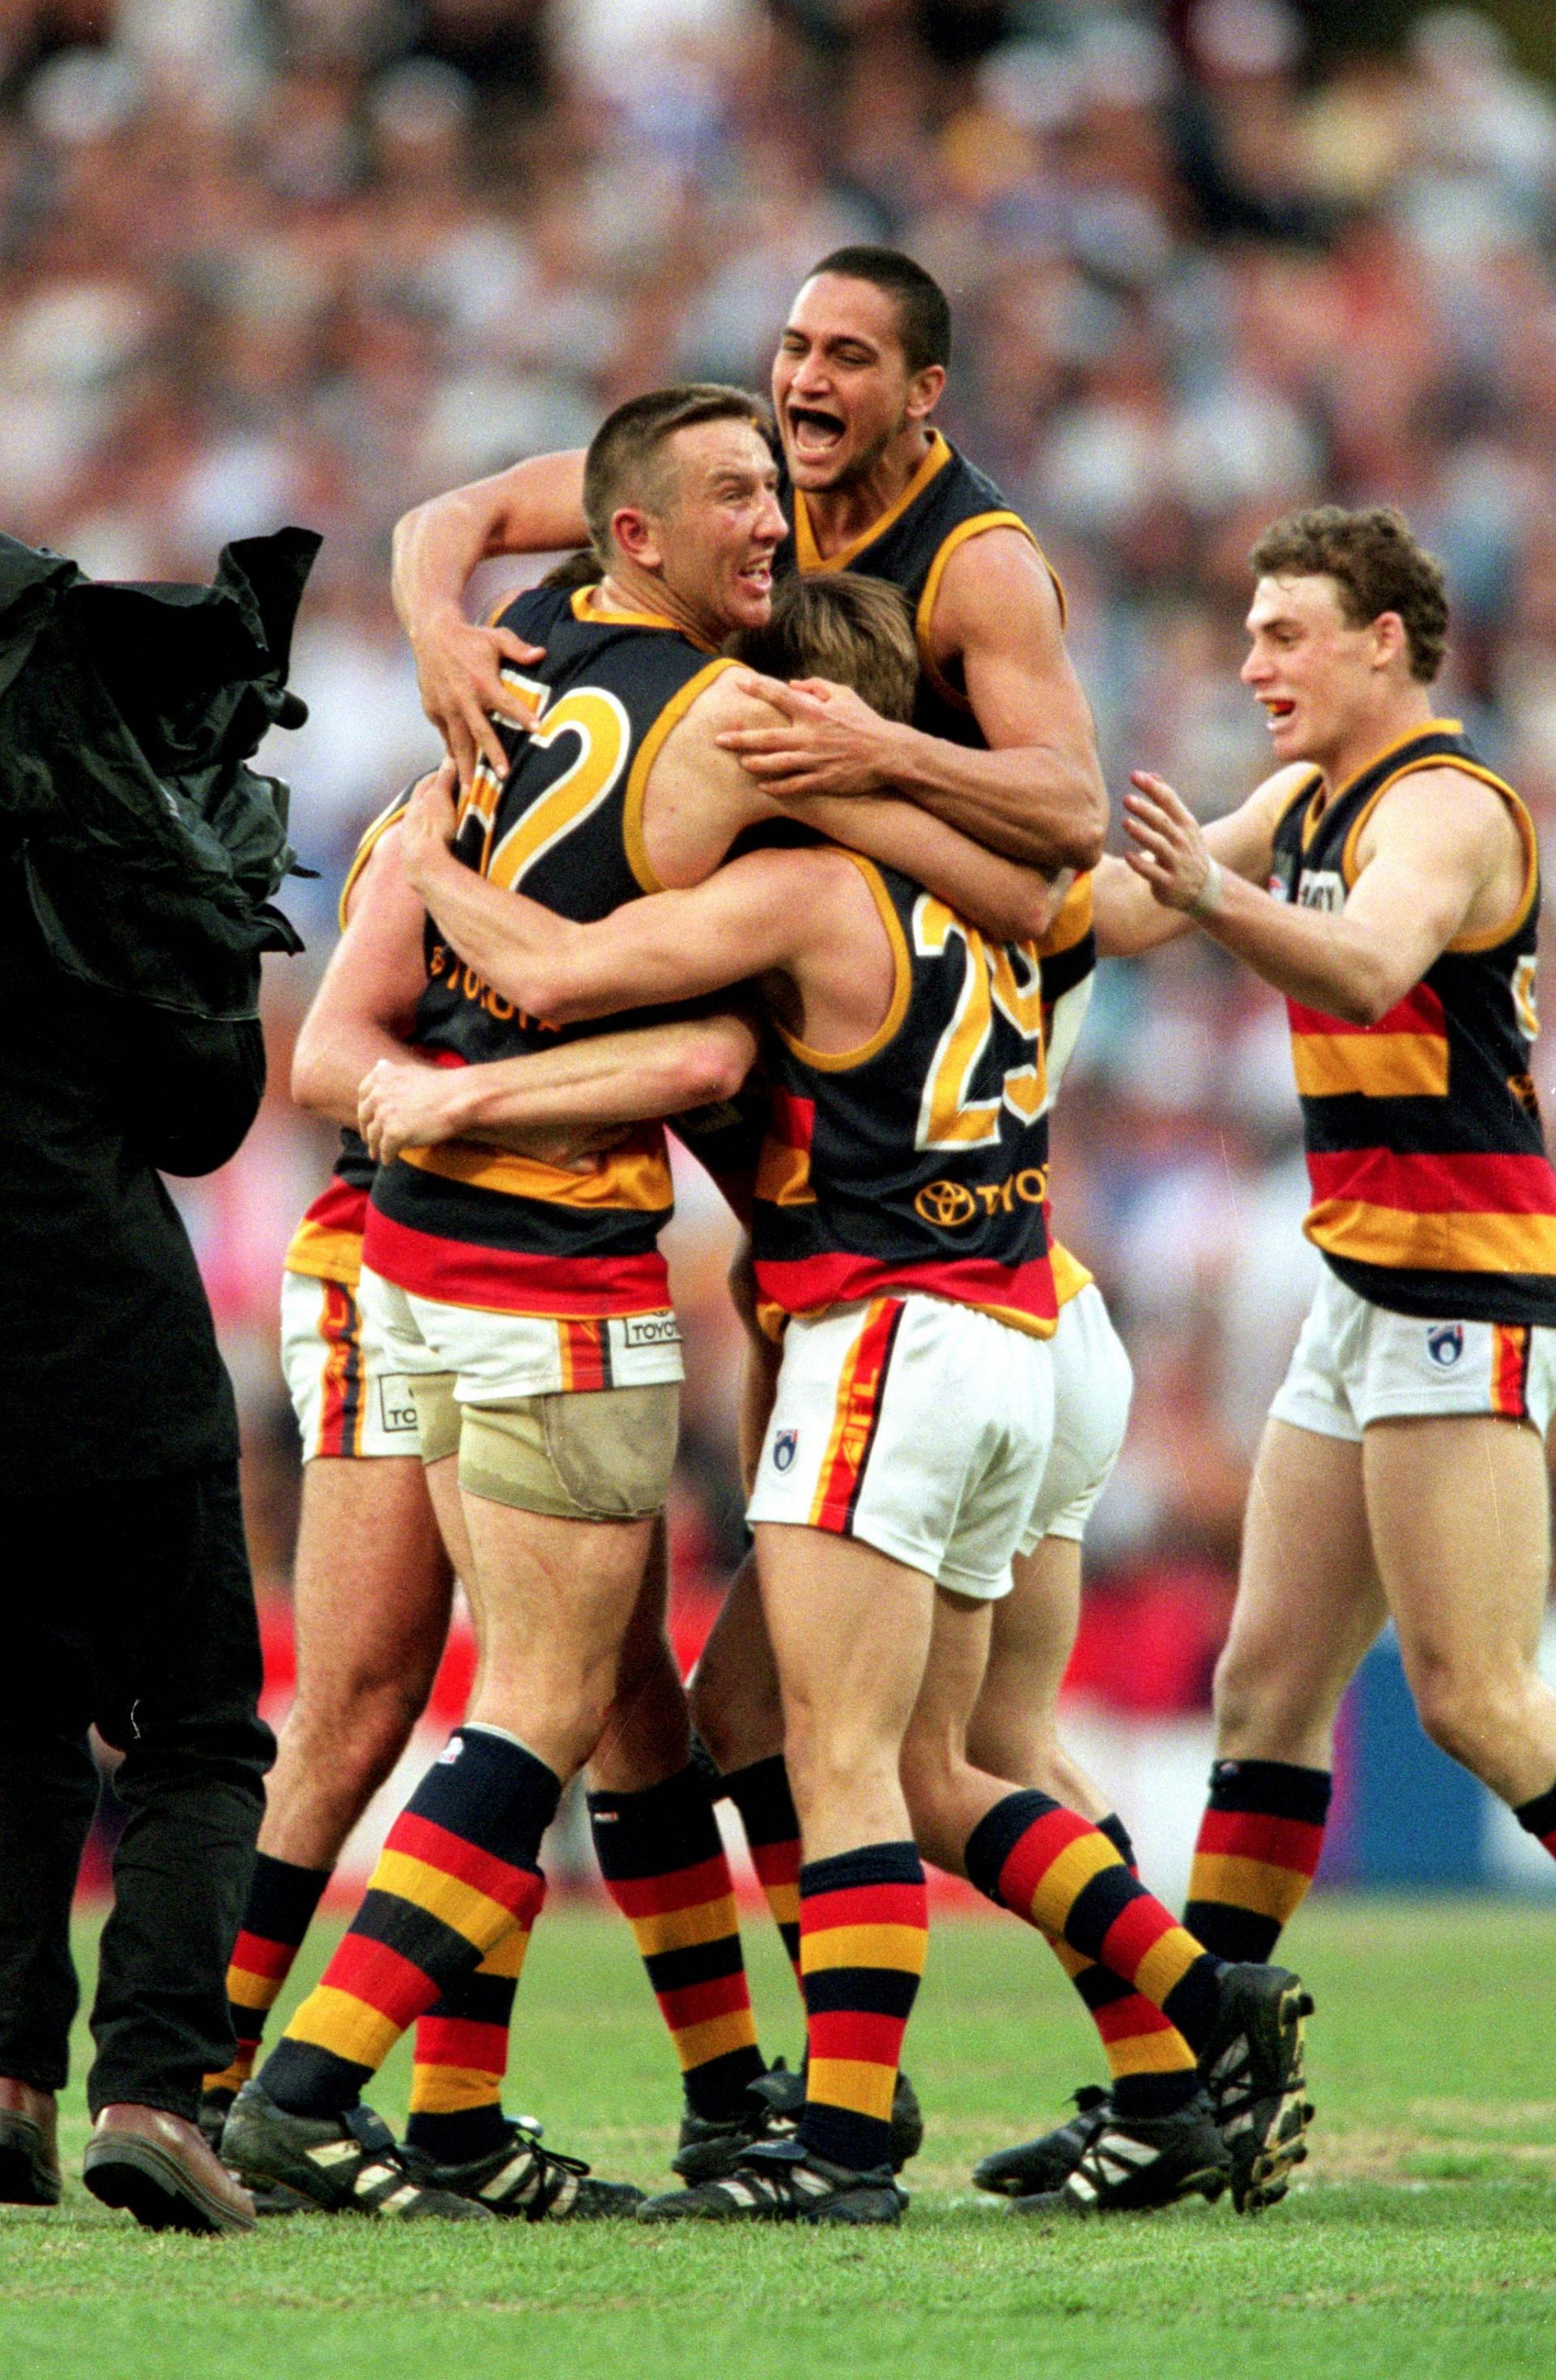 The Adelaide Crows celebrate after winning the 1998 AFL Grand Final between the Adelaide Crows and the North Melbourne Kangaroos